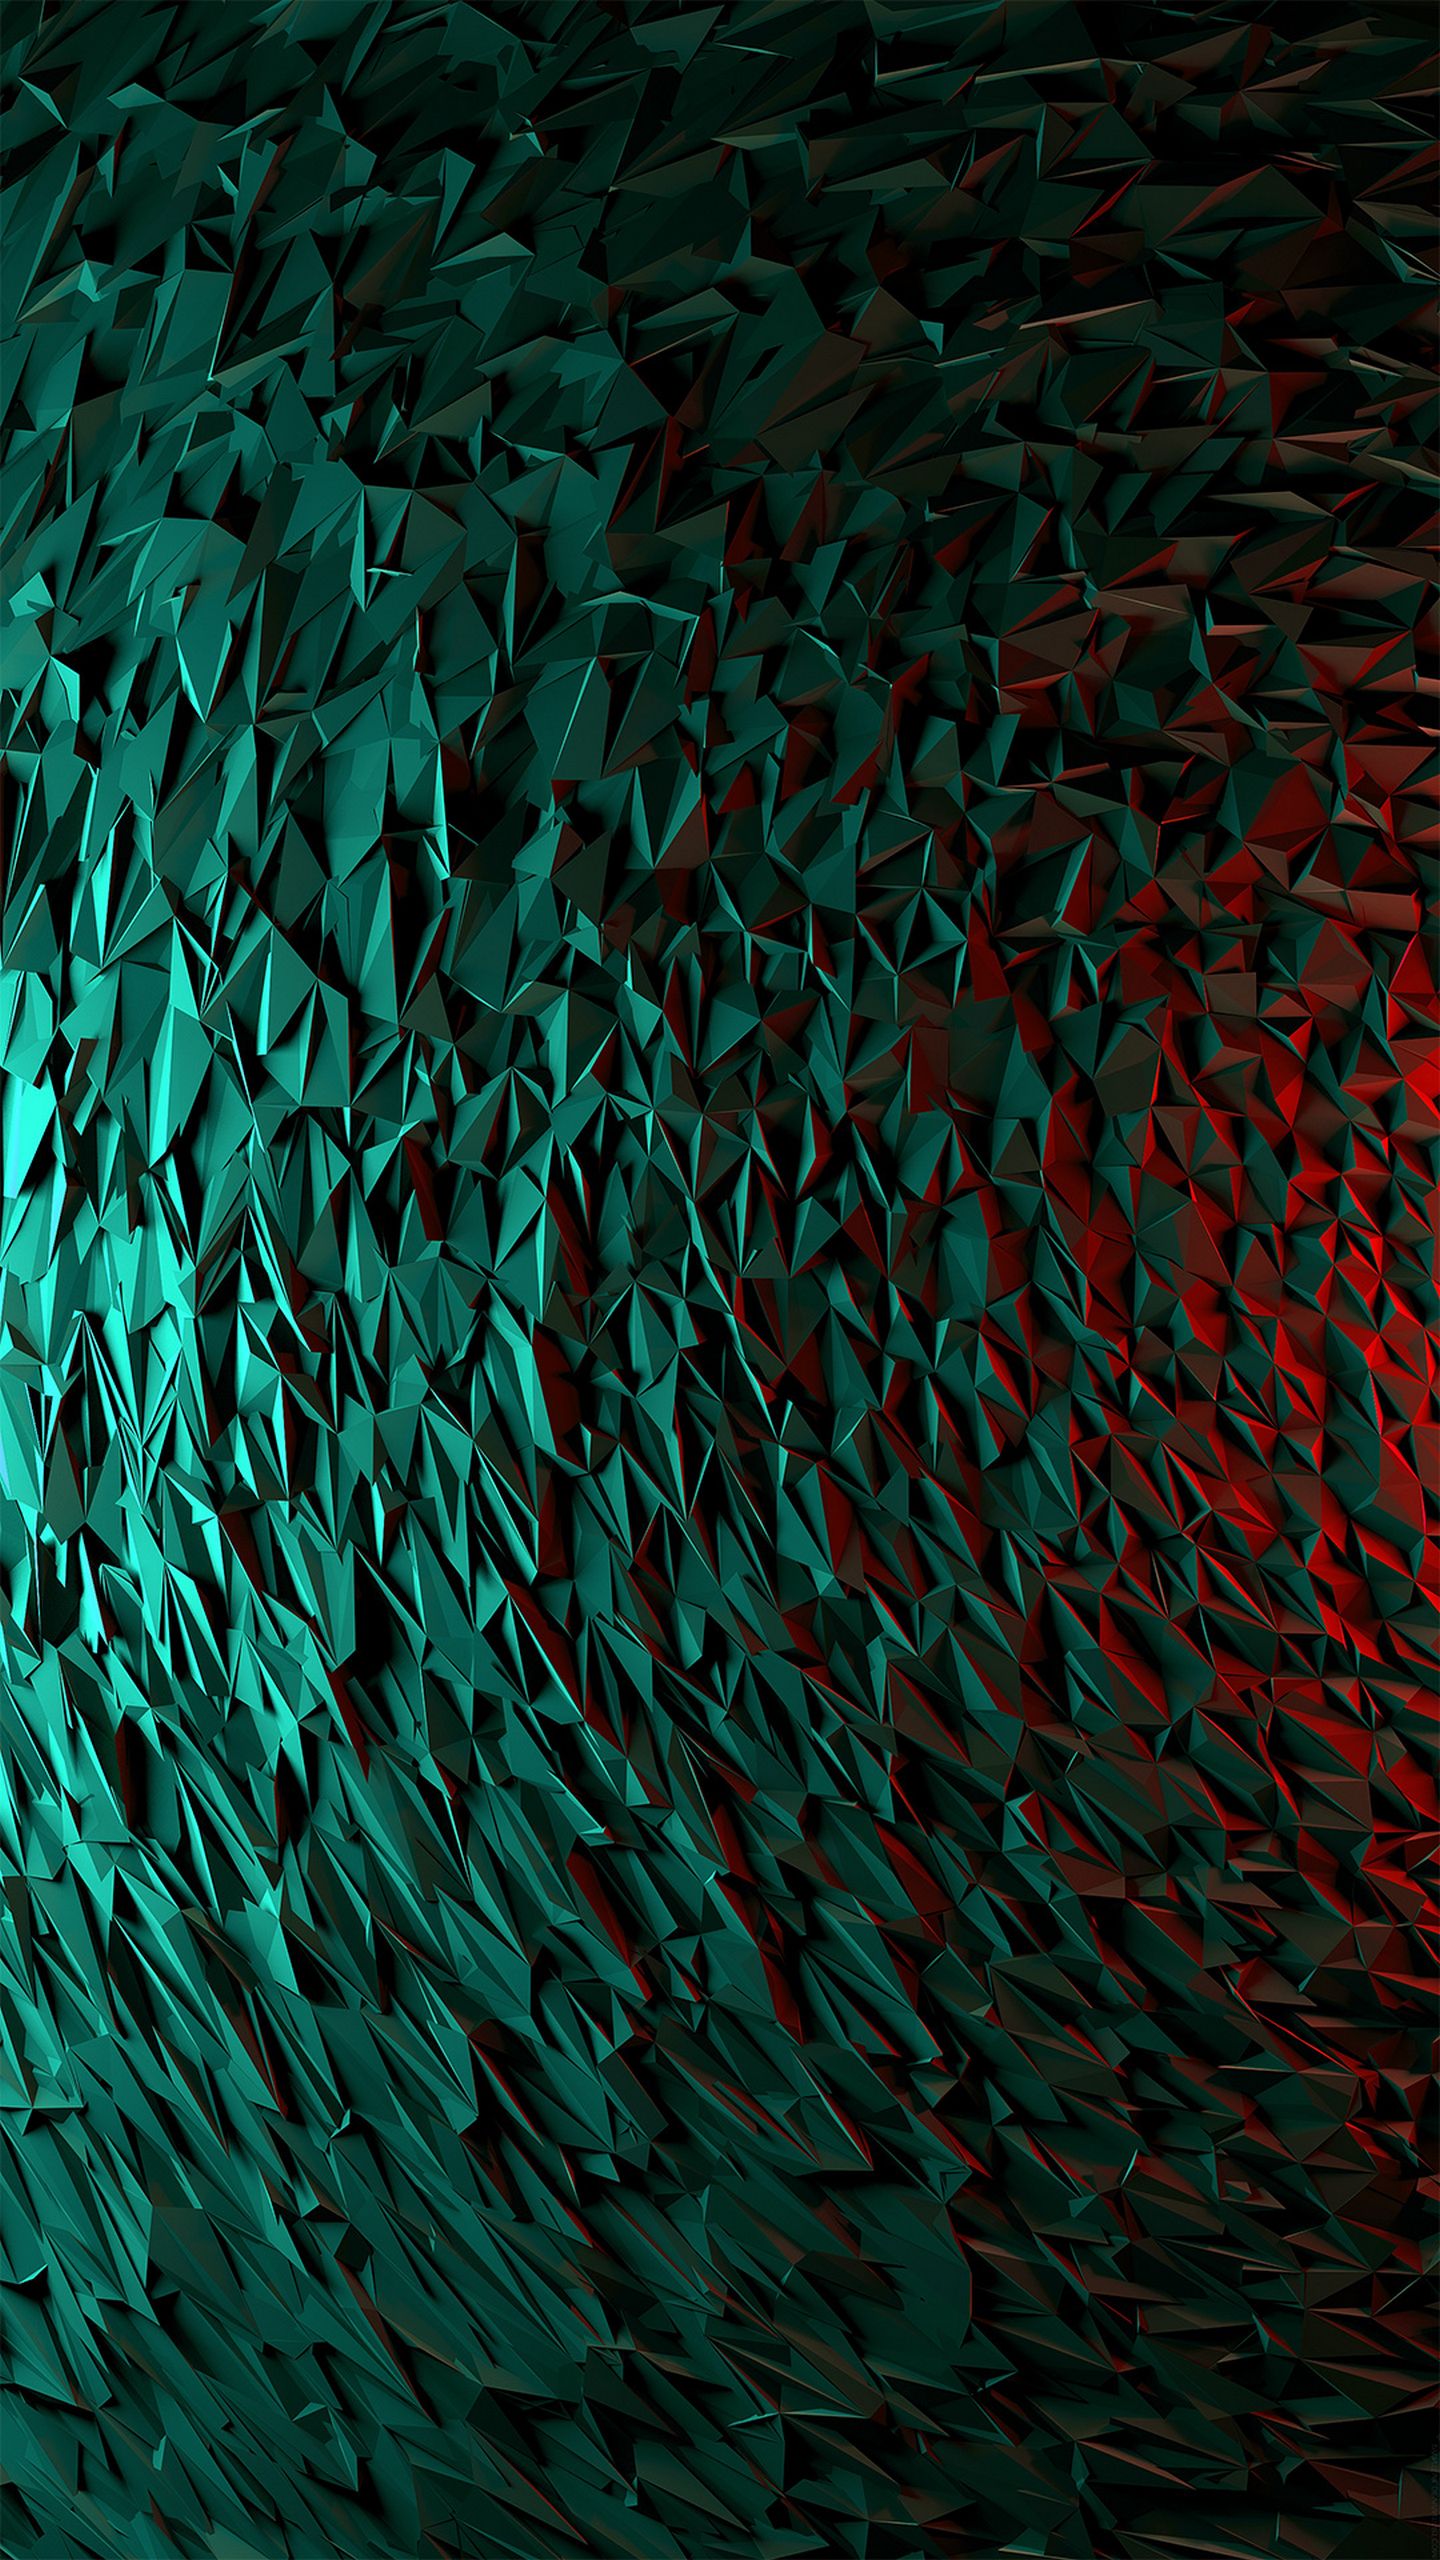 wallpaper photo hd,green,turquoise,red,teal,pattern